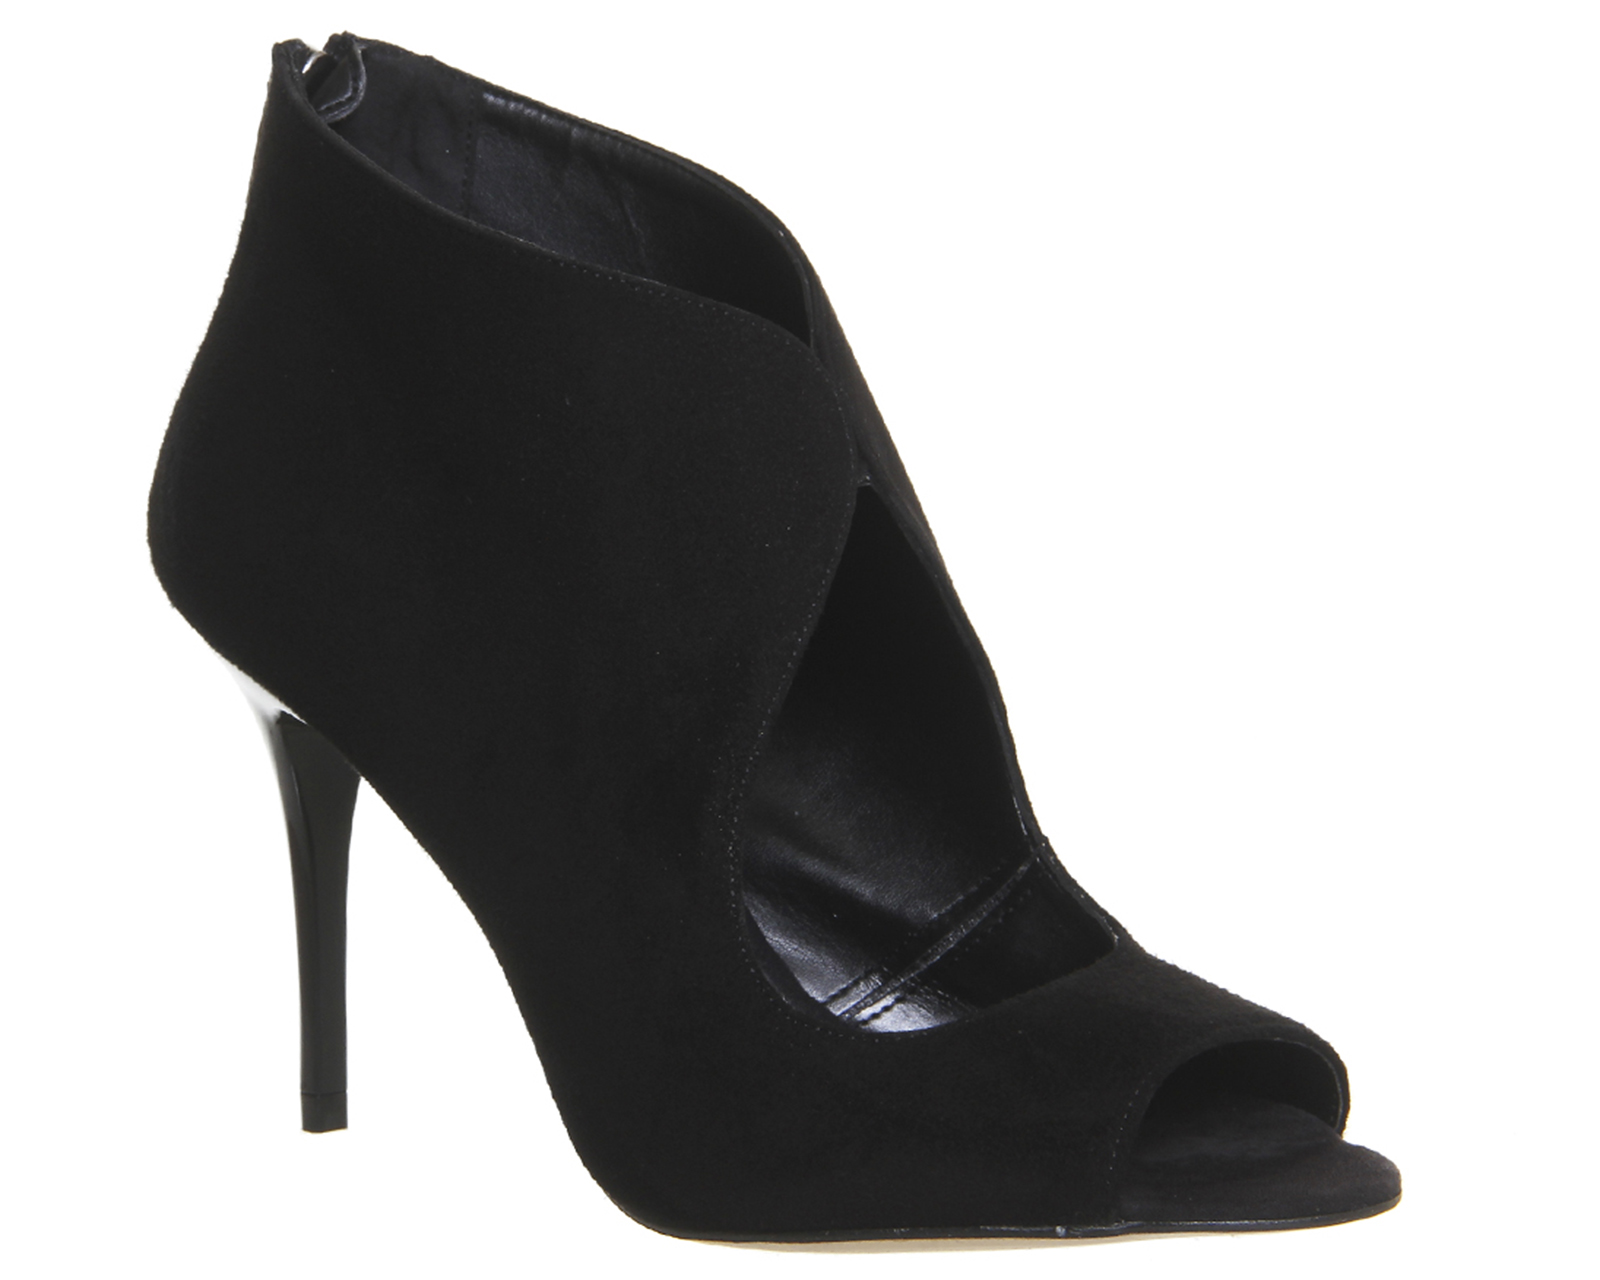 OFFICEQuids In Cut Out Shoe BootsBlack Suede